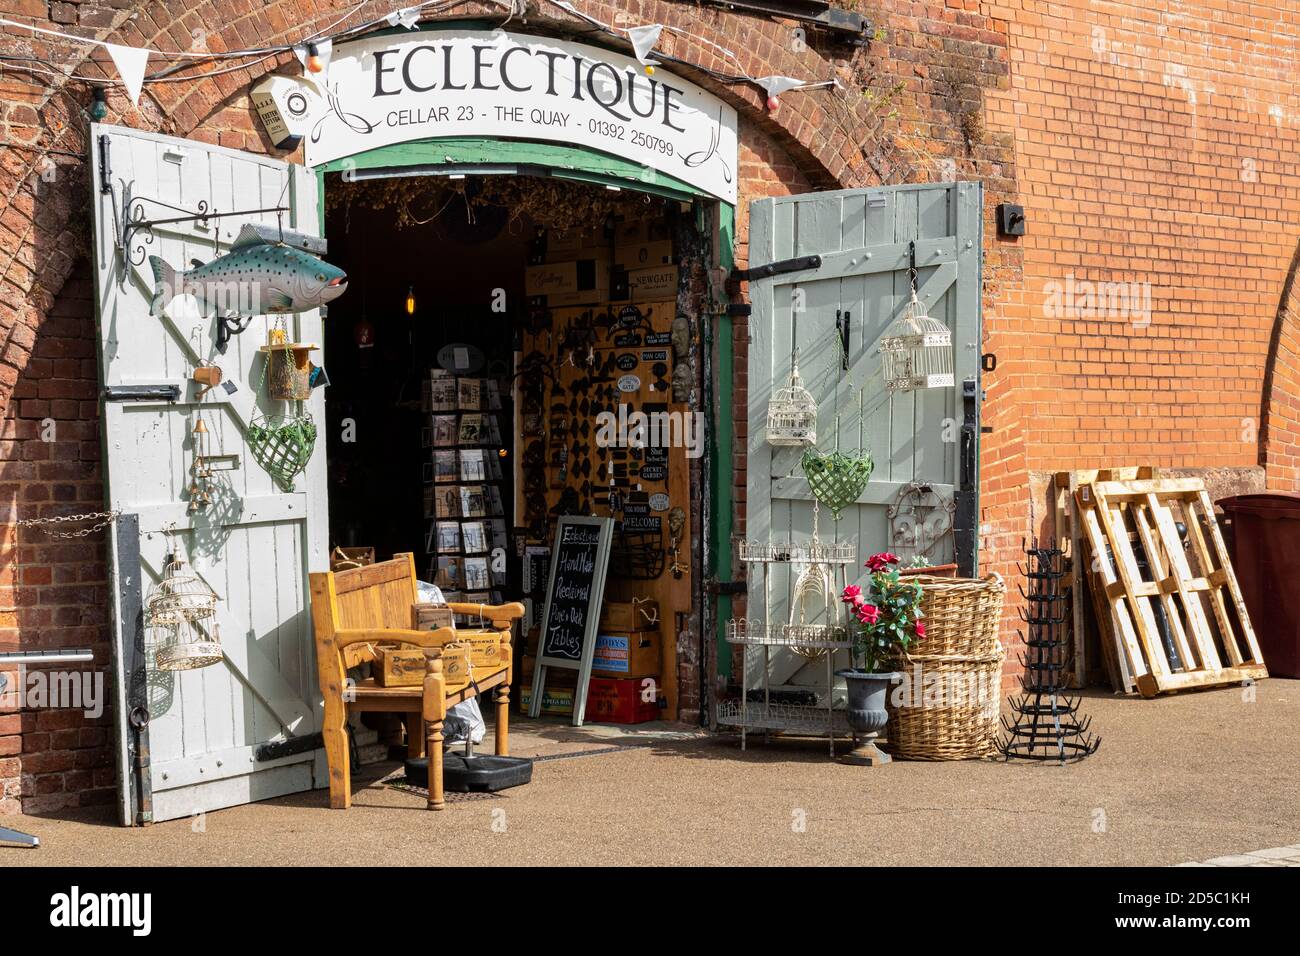 Detail of Open Doors and Entrance to an Artisan Gift Shop at The Historic Cellars on a Sunny Autumn Afternoon, Exeter Quay, Exeter, Devon. Stock Photo